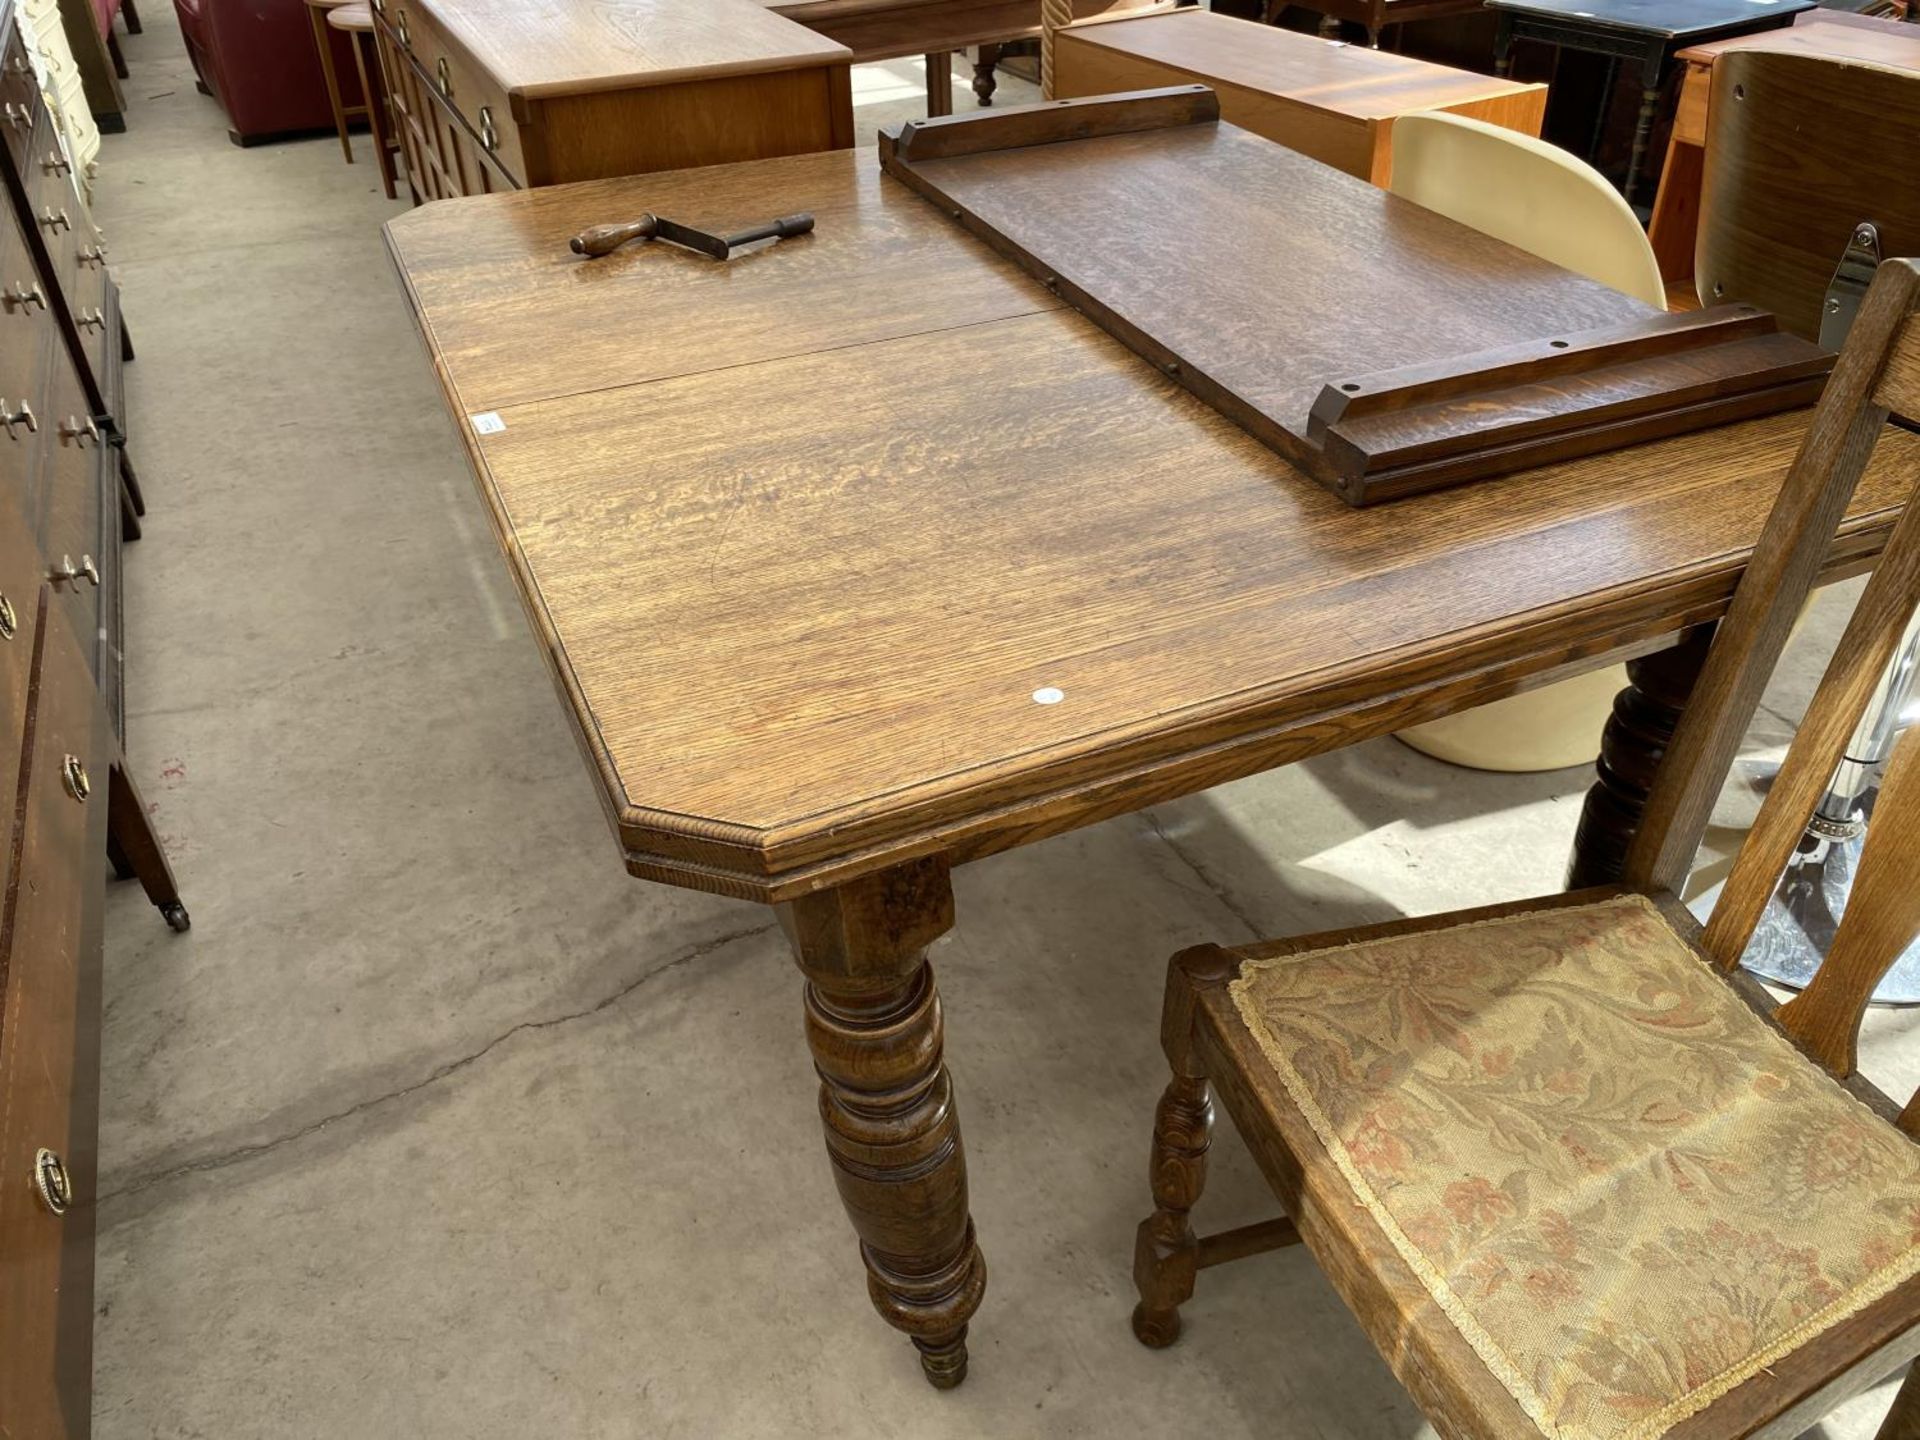 AN EDWARDIAN OAK WIND OUT DINING TABLE WITH CANTED CORNERS, SPARE LEAF AND WINDER 53 INCHES X 42